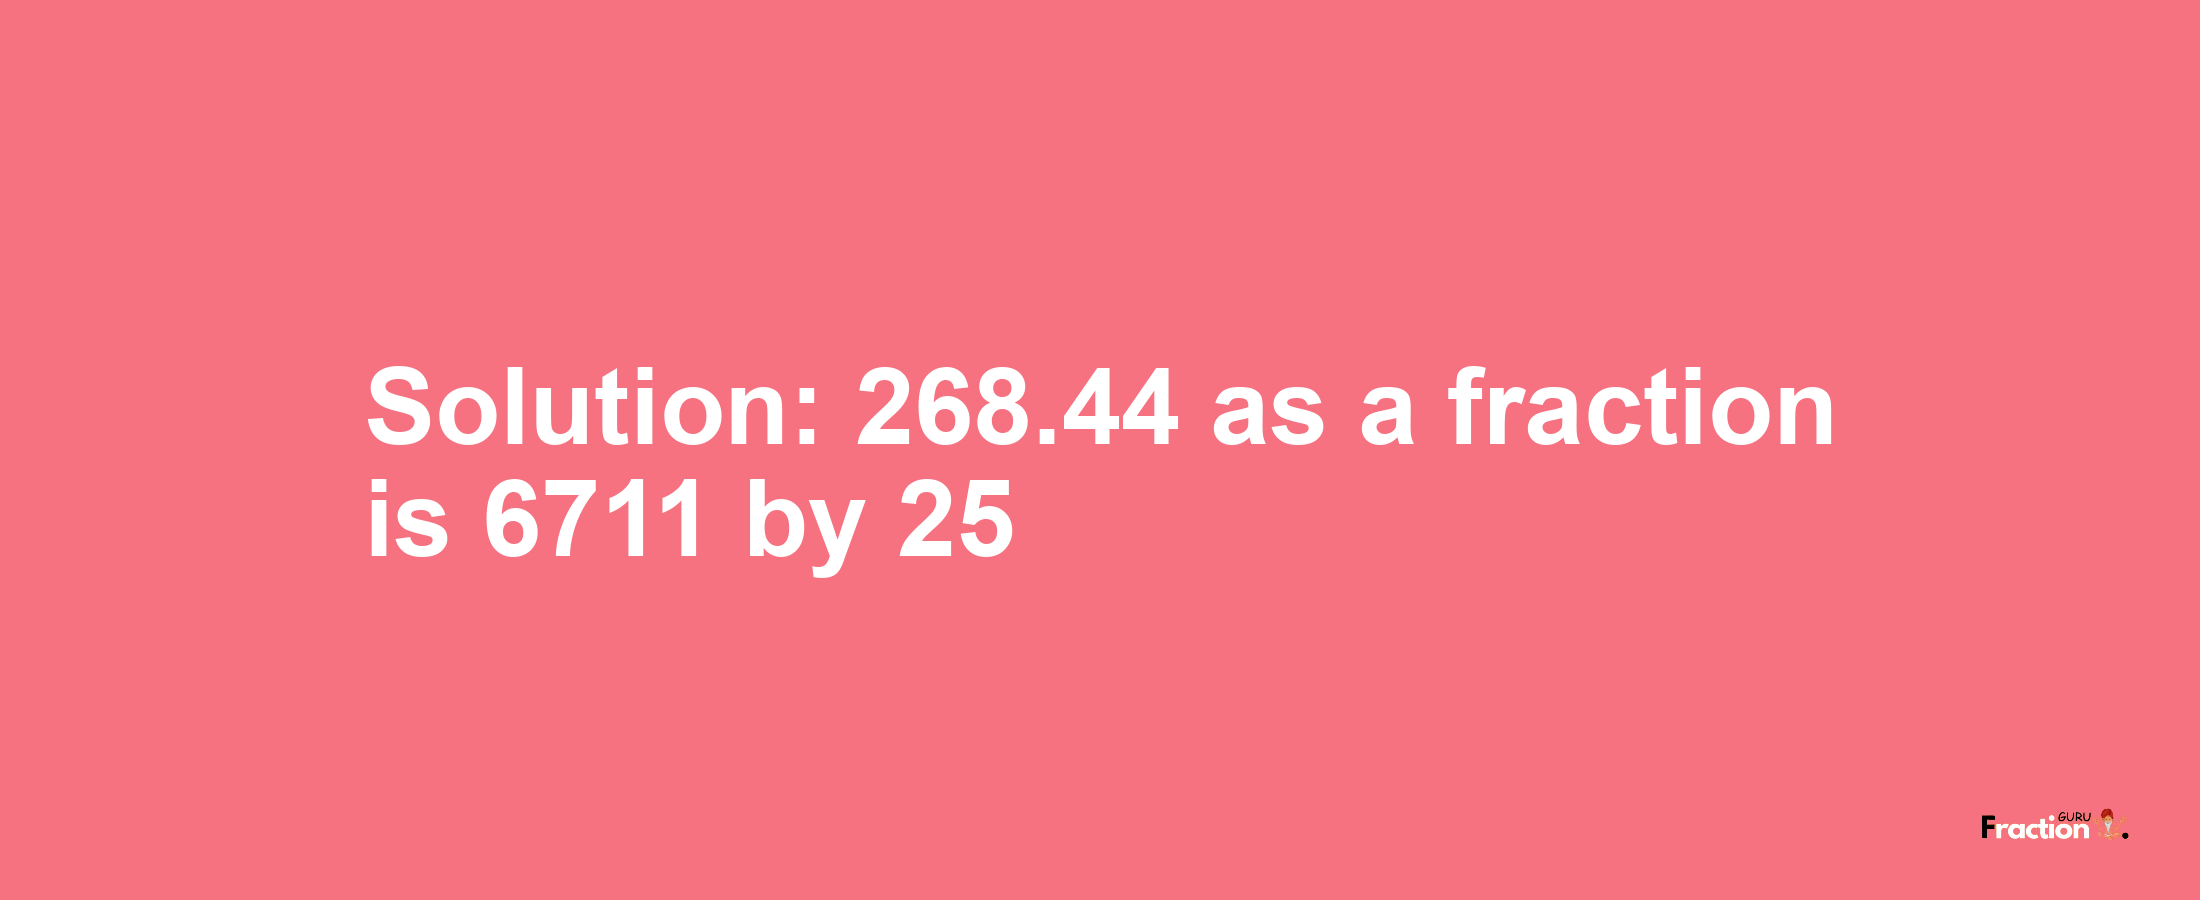 Solution:268.44 as a fraction is 6711/25